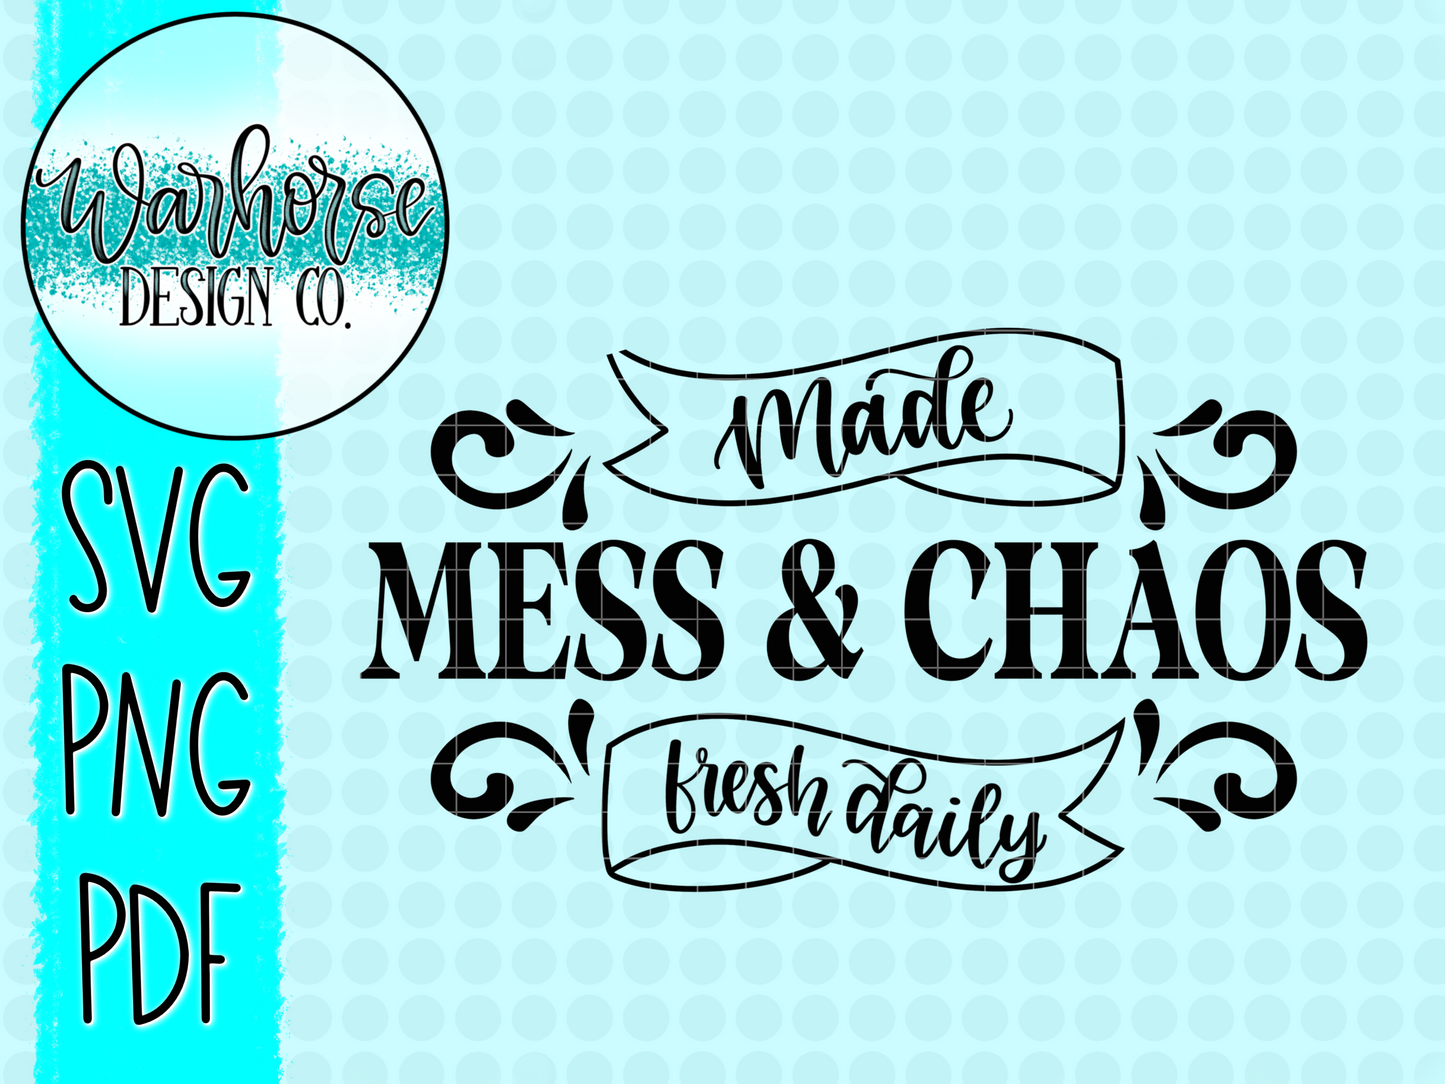 Mess & Chaos made daily PNG SVG PDF